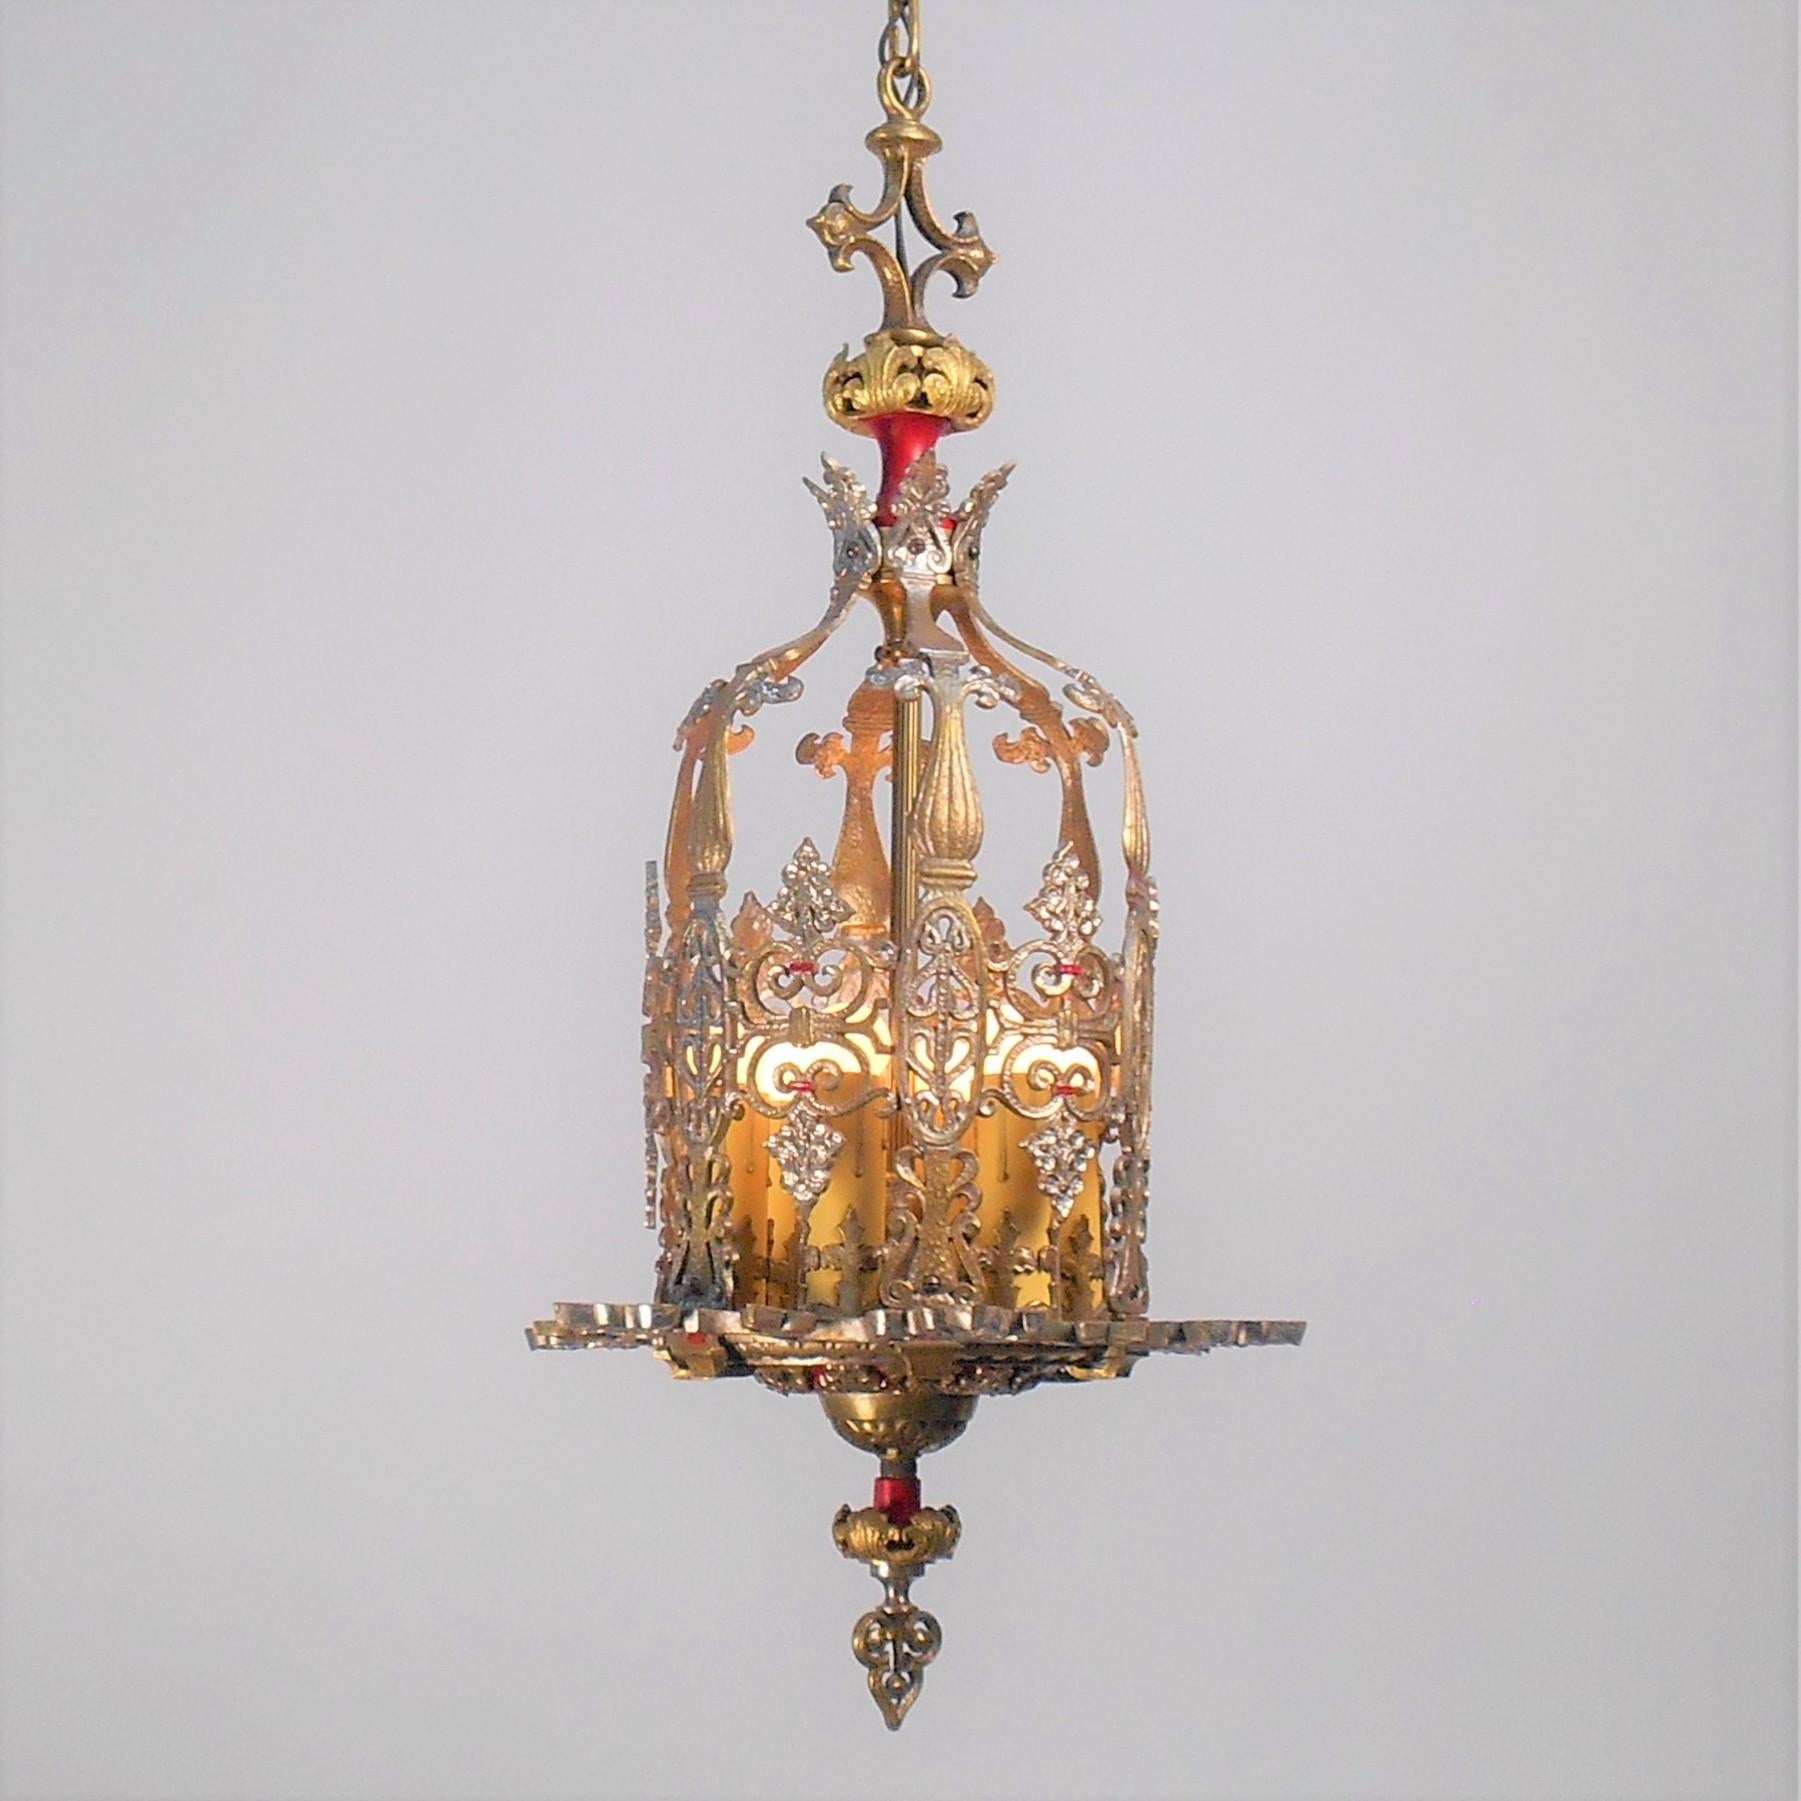 Incredible example of a meticulously restored 1920's decorative pendant lantern. Reticulated cast brass featuring red, silver and gold accents. Made by the Max Schaffer Co. Circa 1920's

Size: 14